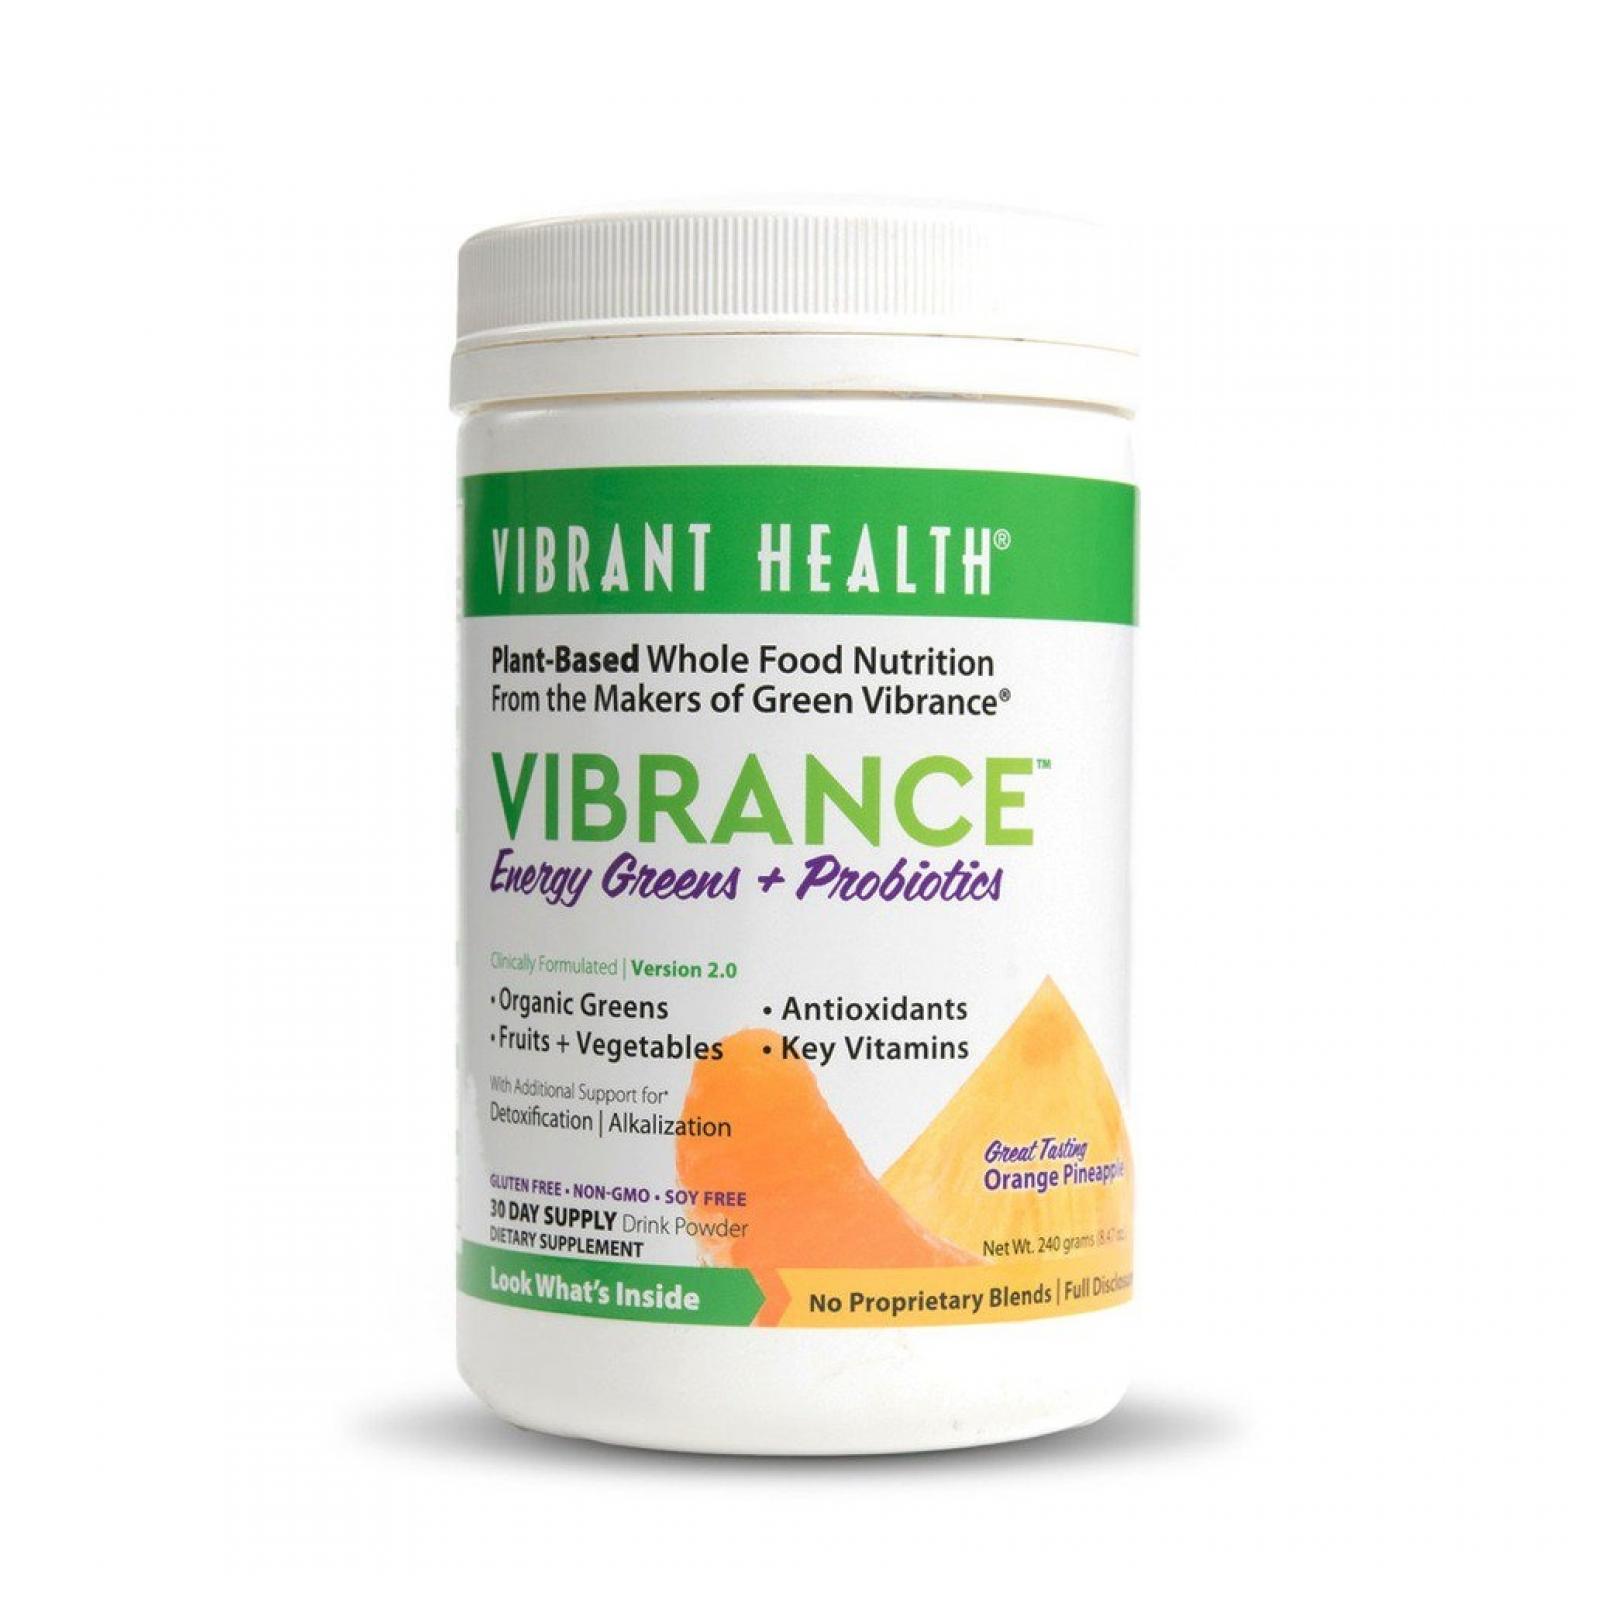 Vibrant Health Vibrance® Essential Daily Green Food Orange Pineapple 9 Oz  30 Day Supply